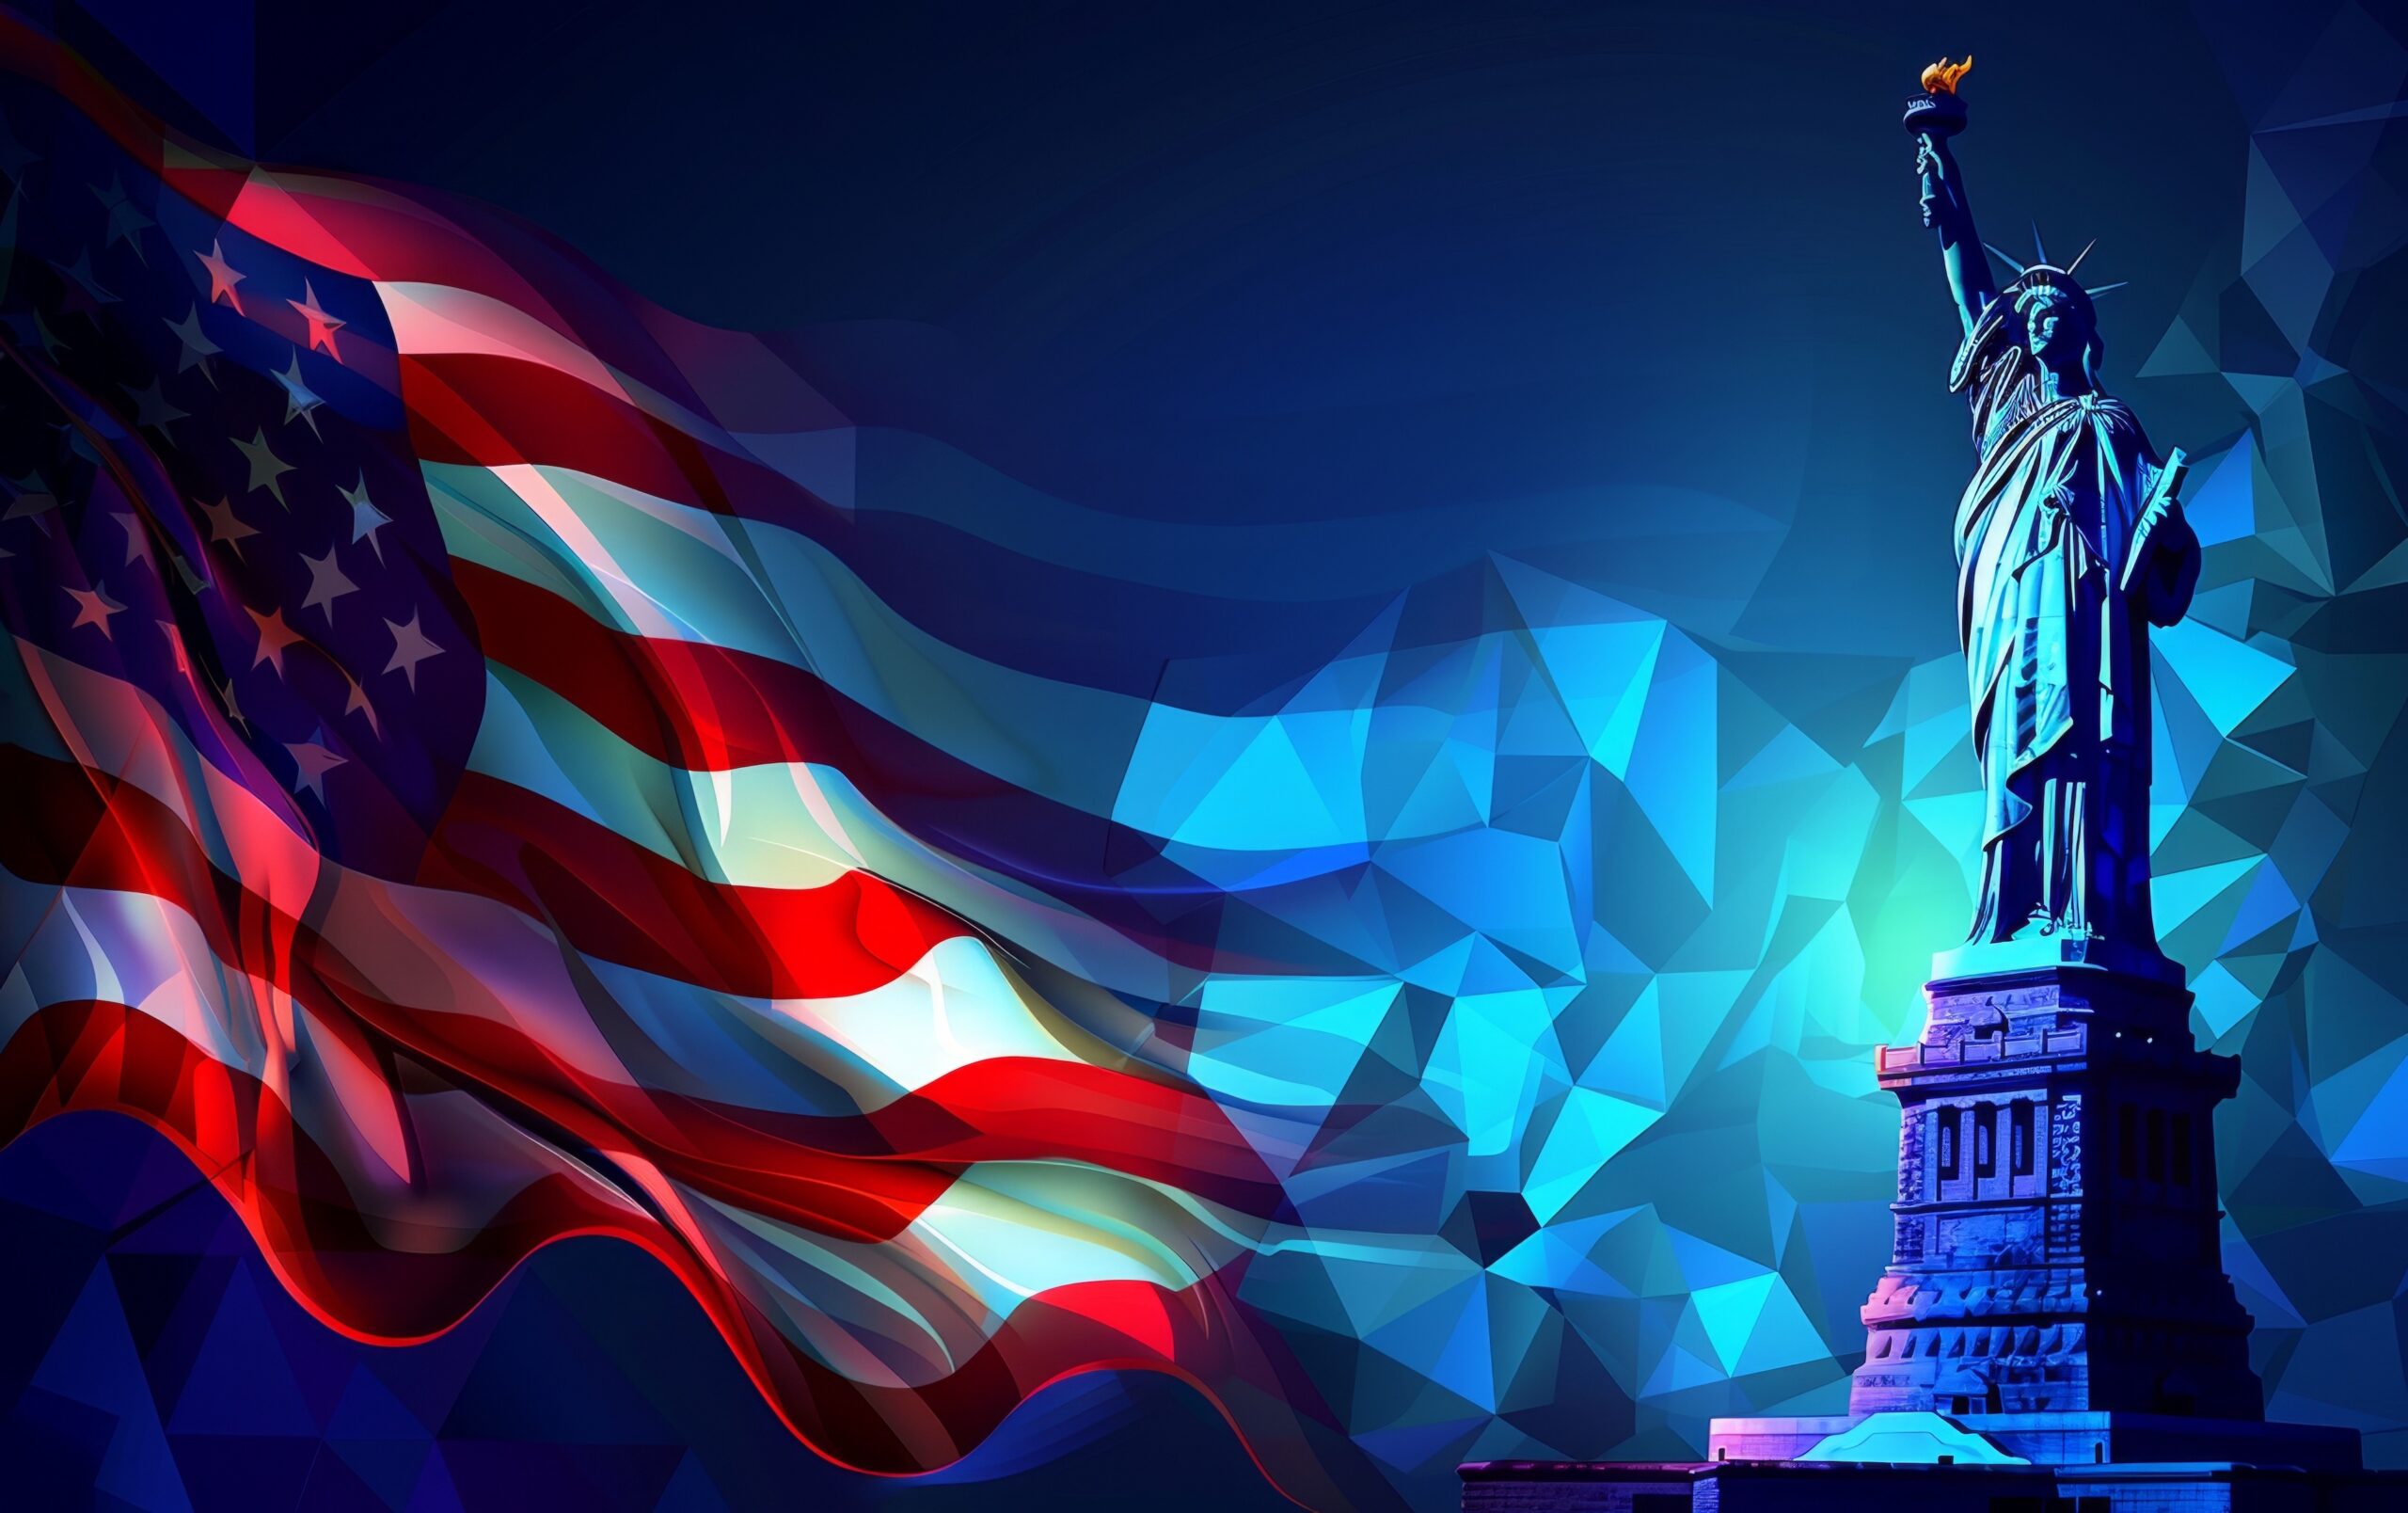 American flag with the Statue of Liberty in front. The background is a dark blue